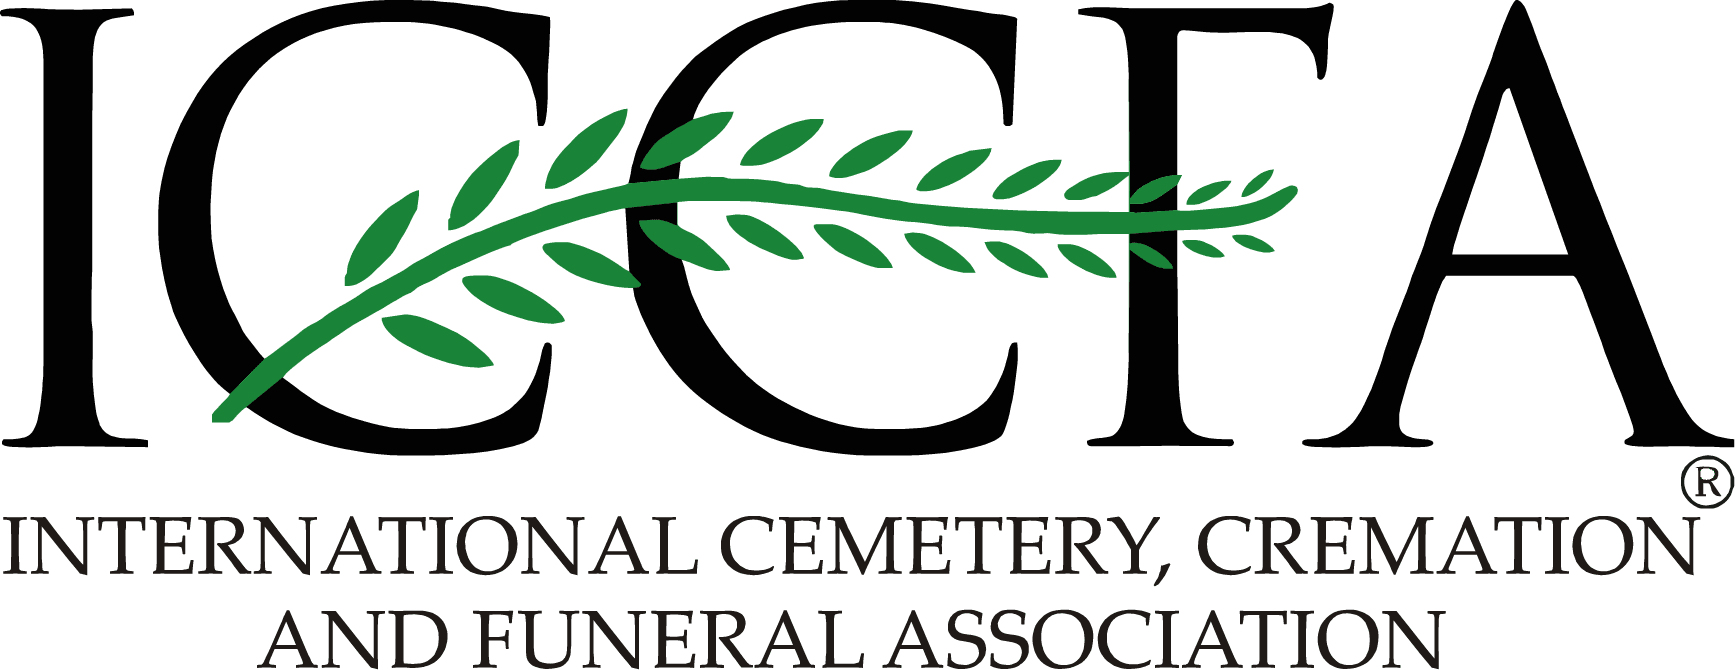 International Cemetery, Cremation and Funeral Association